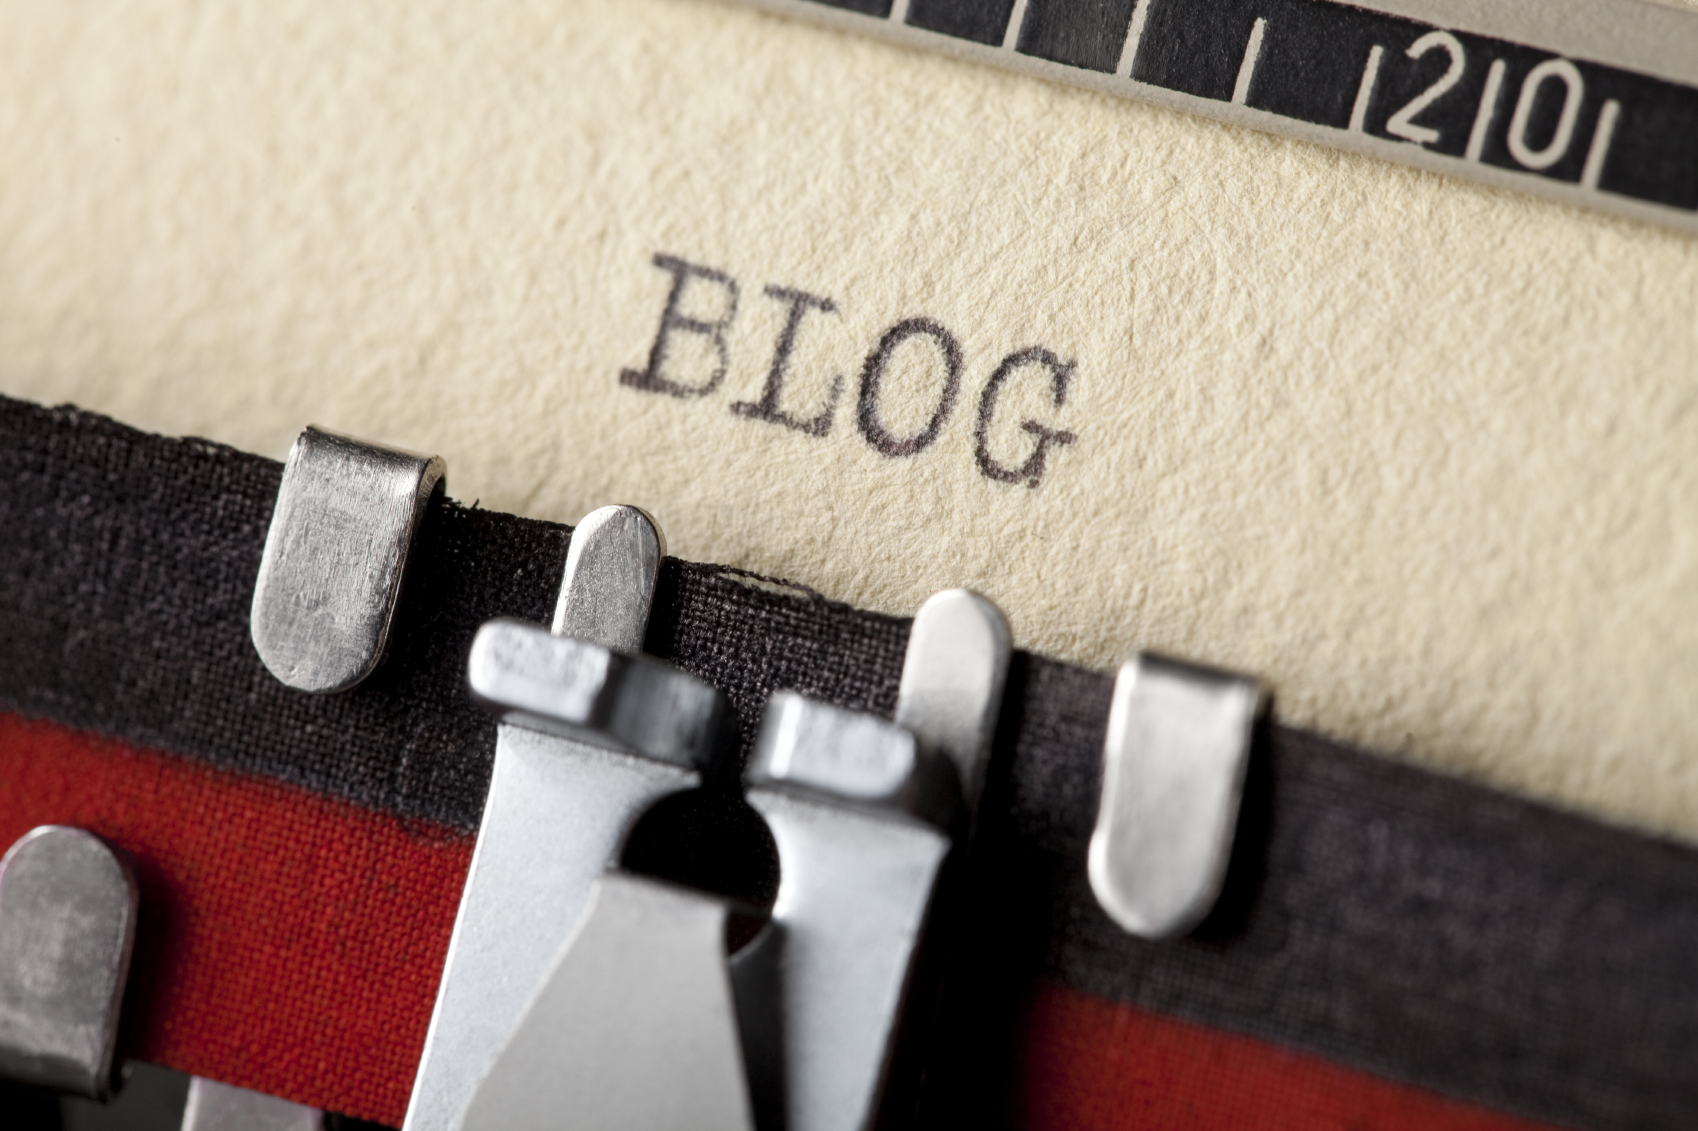 Are blogs still relevant? A 2020 strategy for measuring 